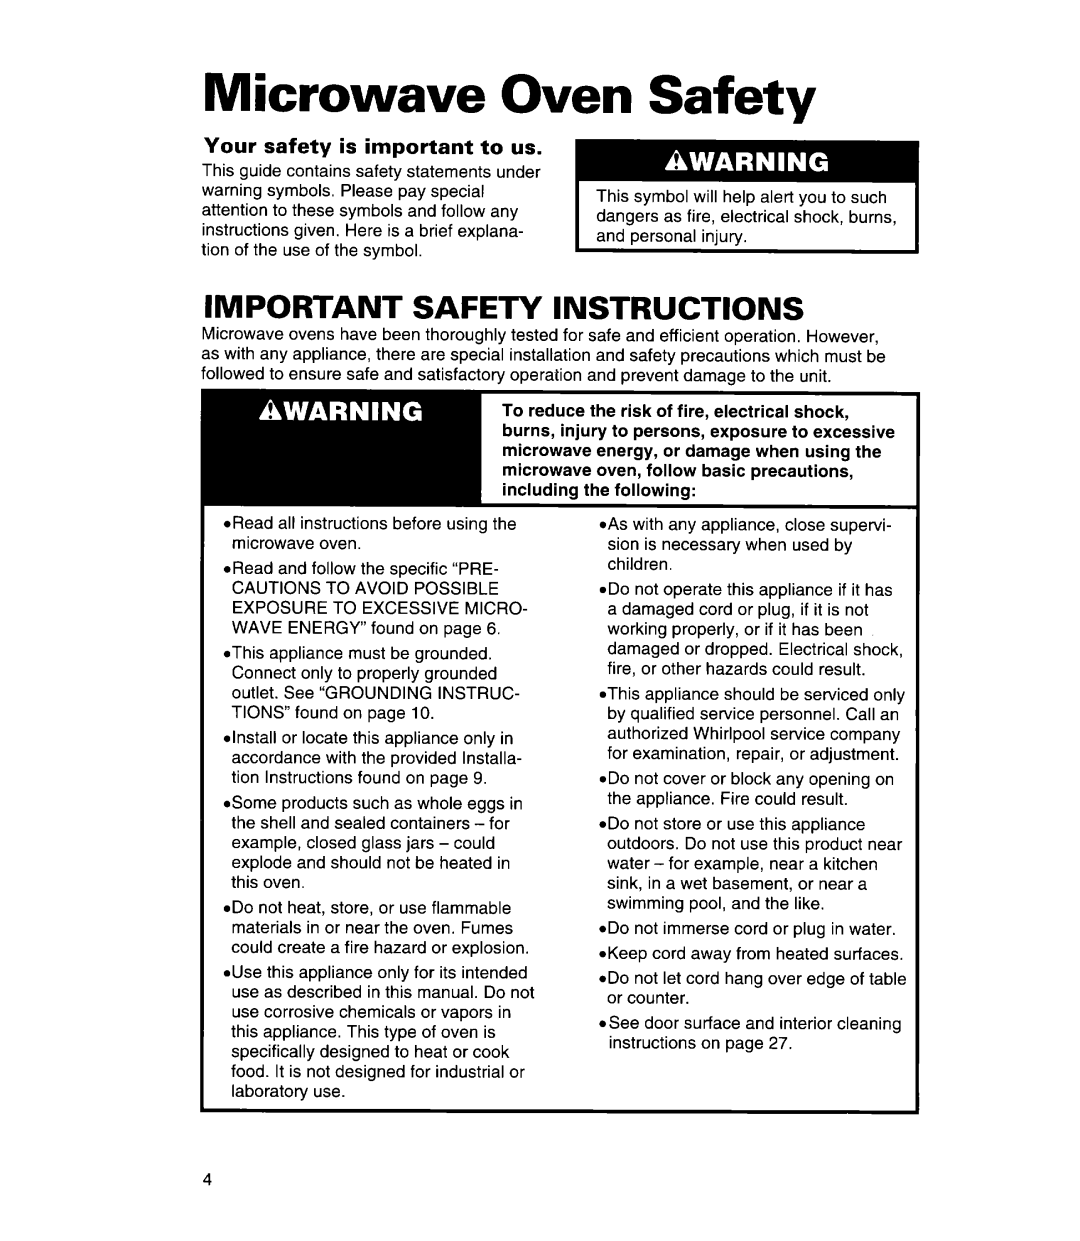 Whirlpool MT7118XD, MT7078XD, MT7116XD Microwave Oven Safety, Important Safety Instructions, Your safety is important to us 